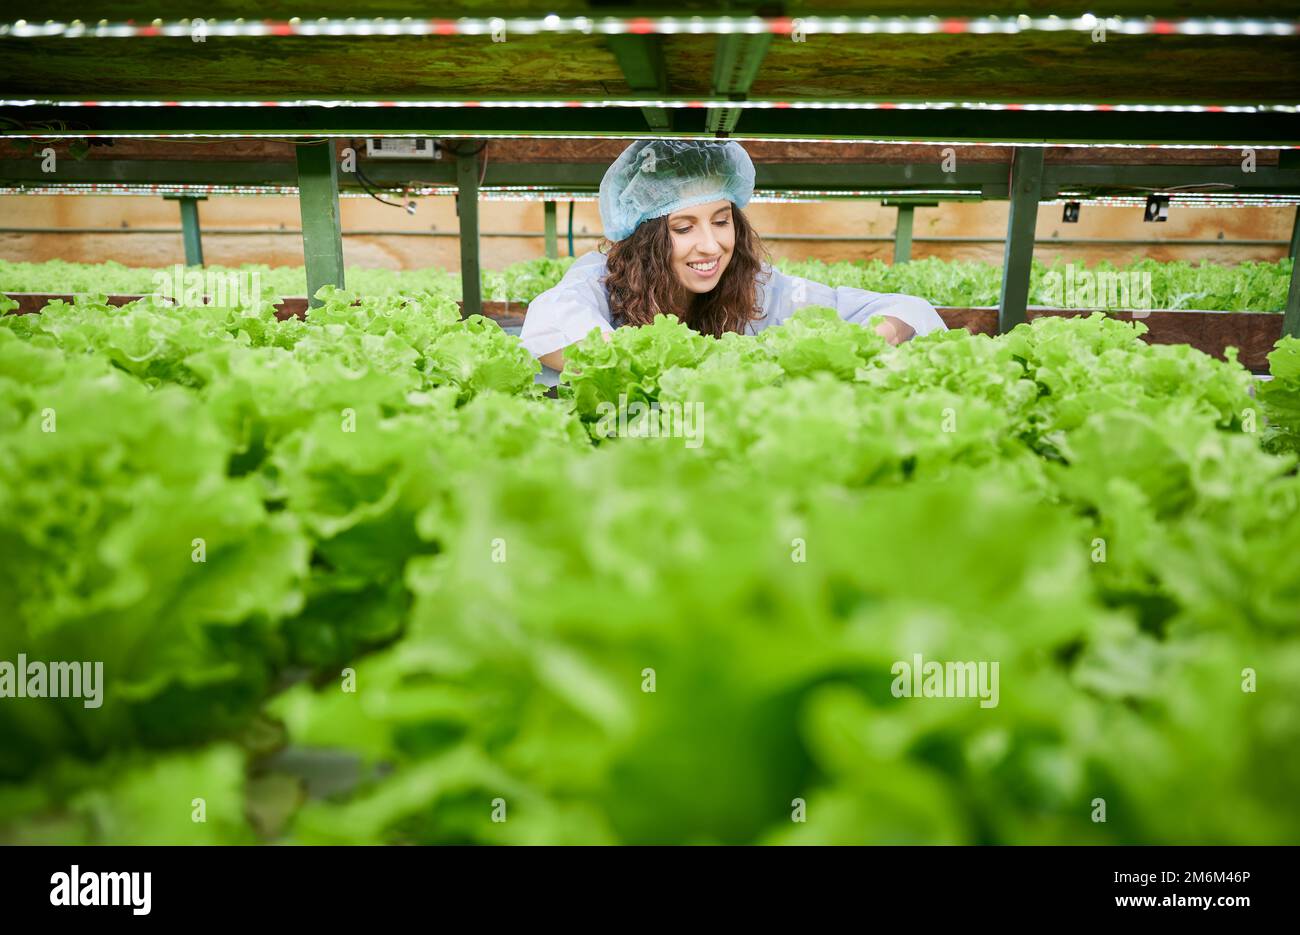 Female gardener controlling plant growth in greenhouse, holding lettuce and smiling while standing near green plants. Joyful woman wearing disposable cap and garden gloves. Stock Photo